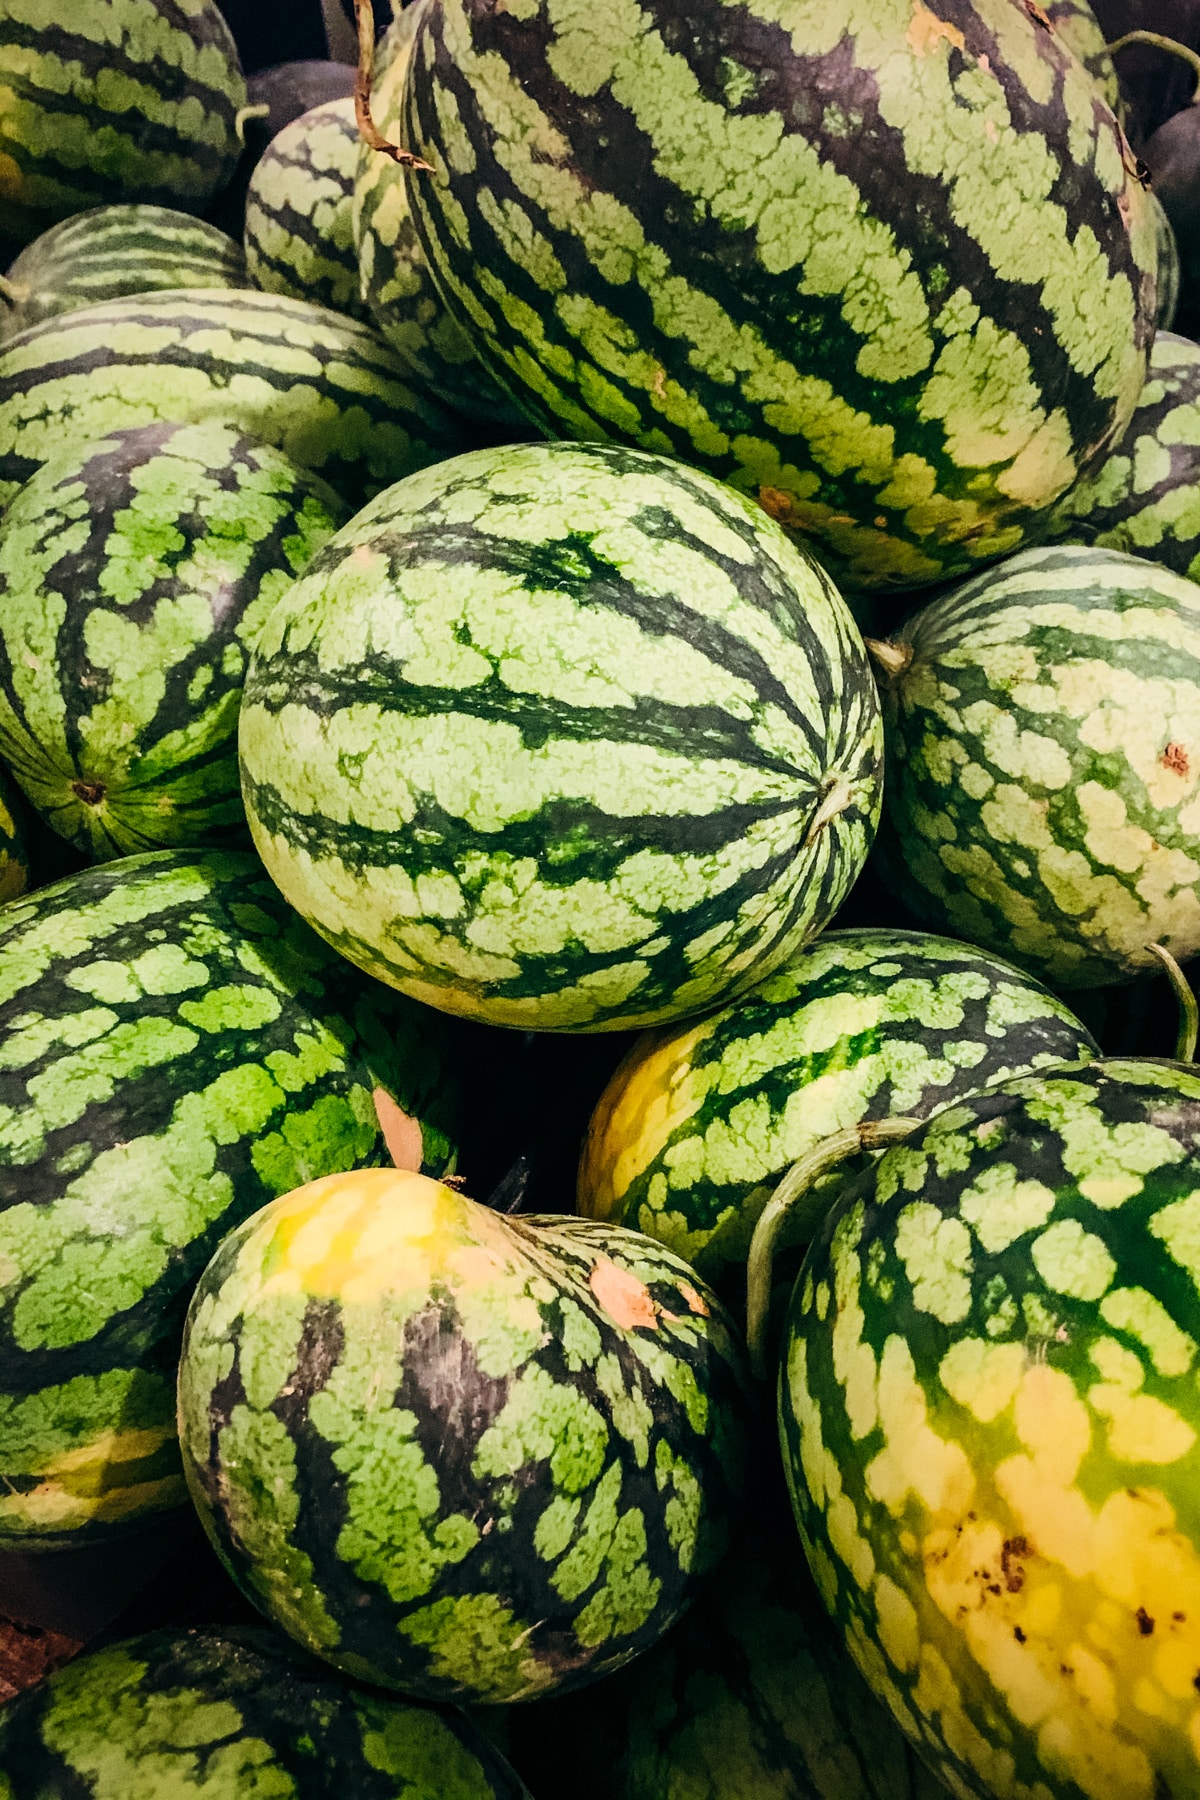 Pile of large ripe watermelons.